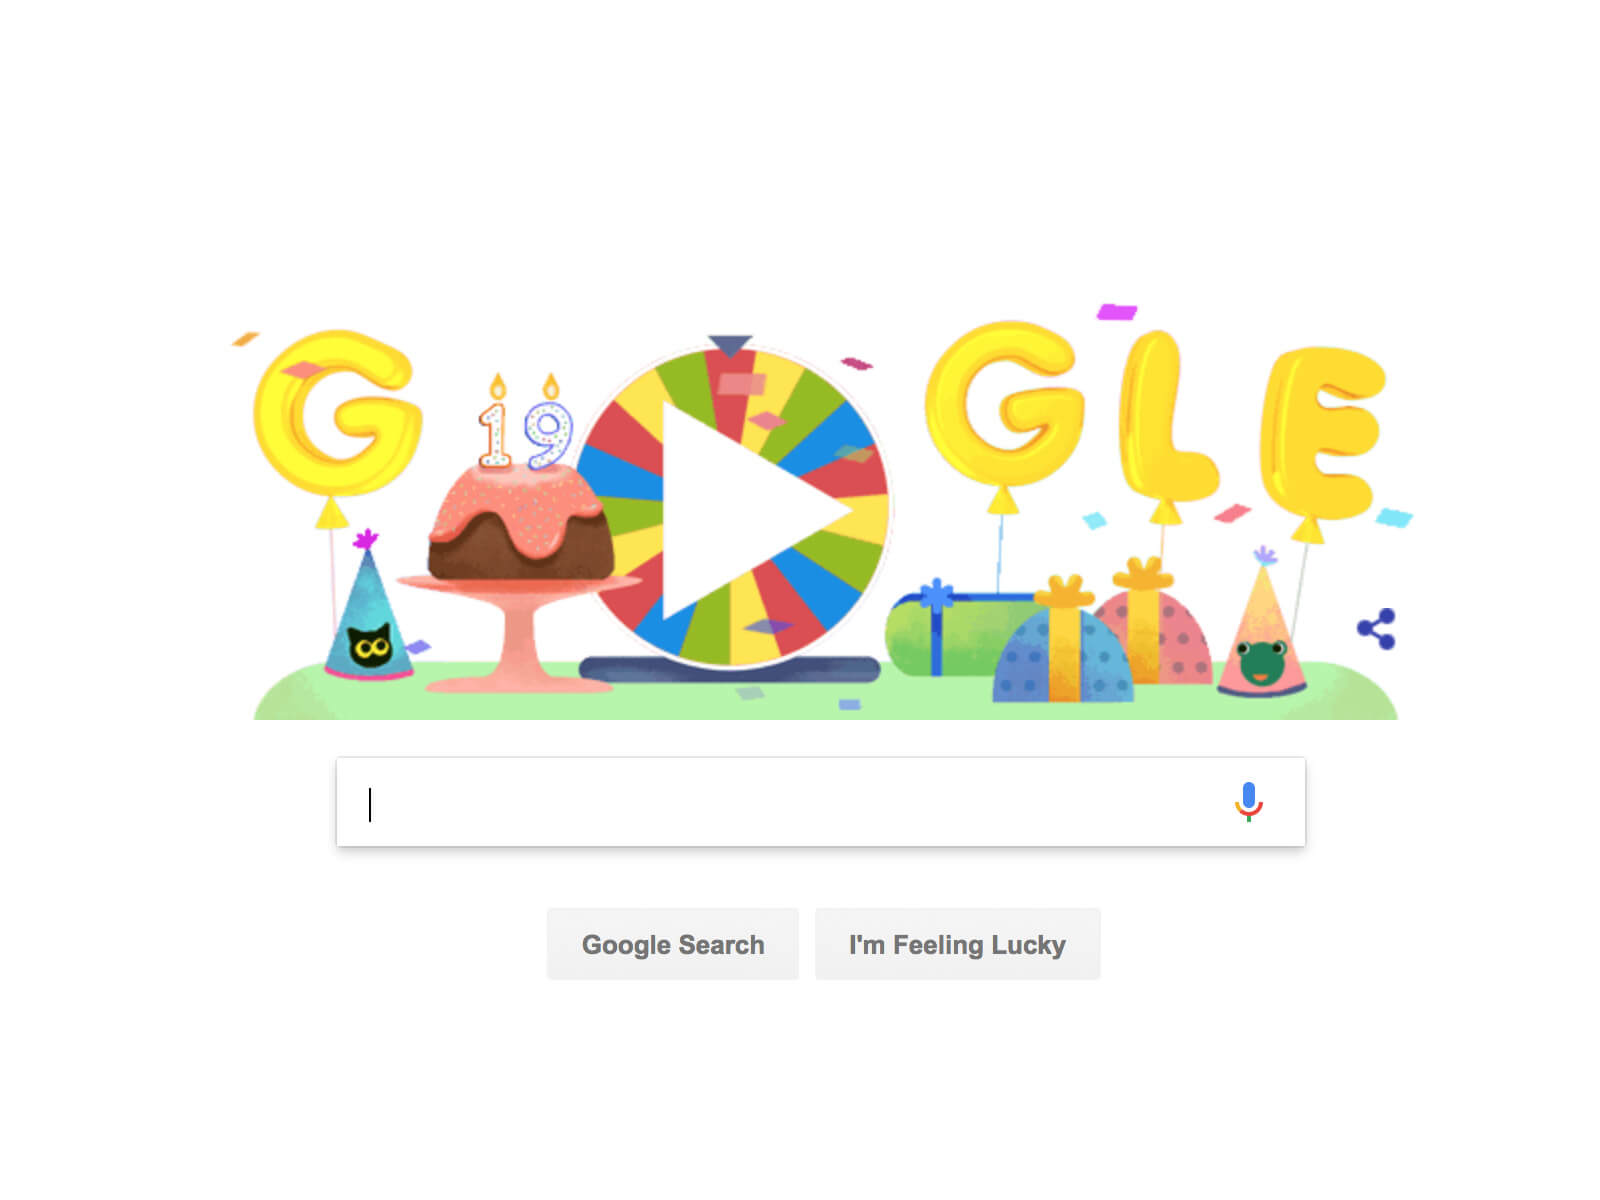 Google celebrates its 19th birthday with 19 past Doodle games